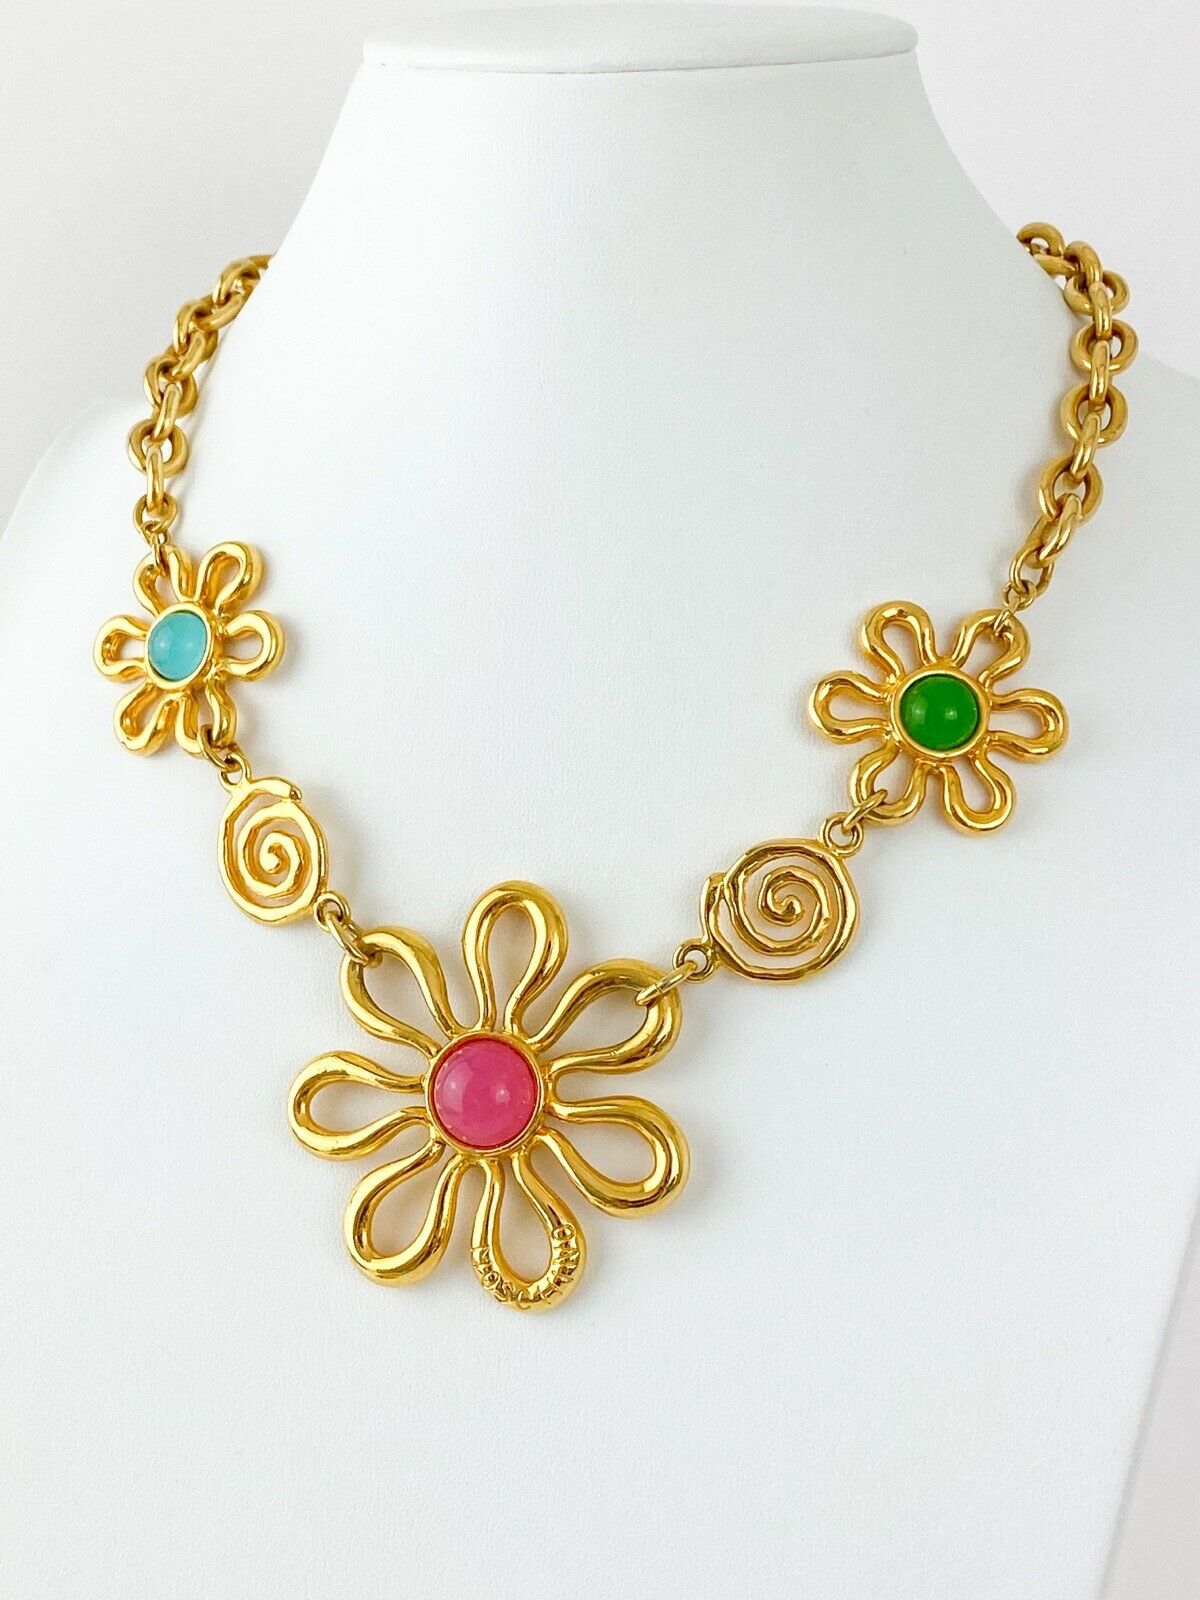 【SOLD OUT】Moschino Bijoux Vintage Gold Tone Necklace Openwork Flower Cabochon